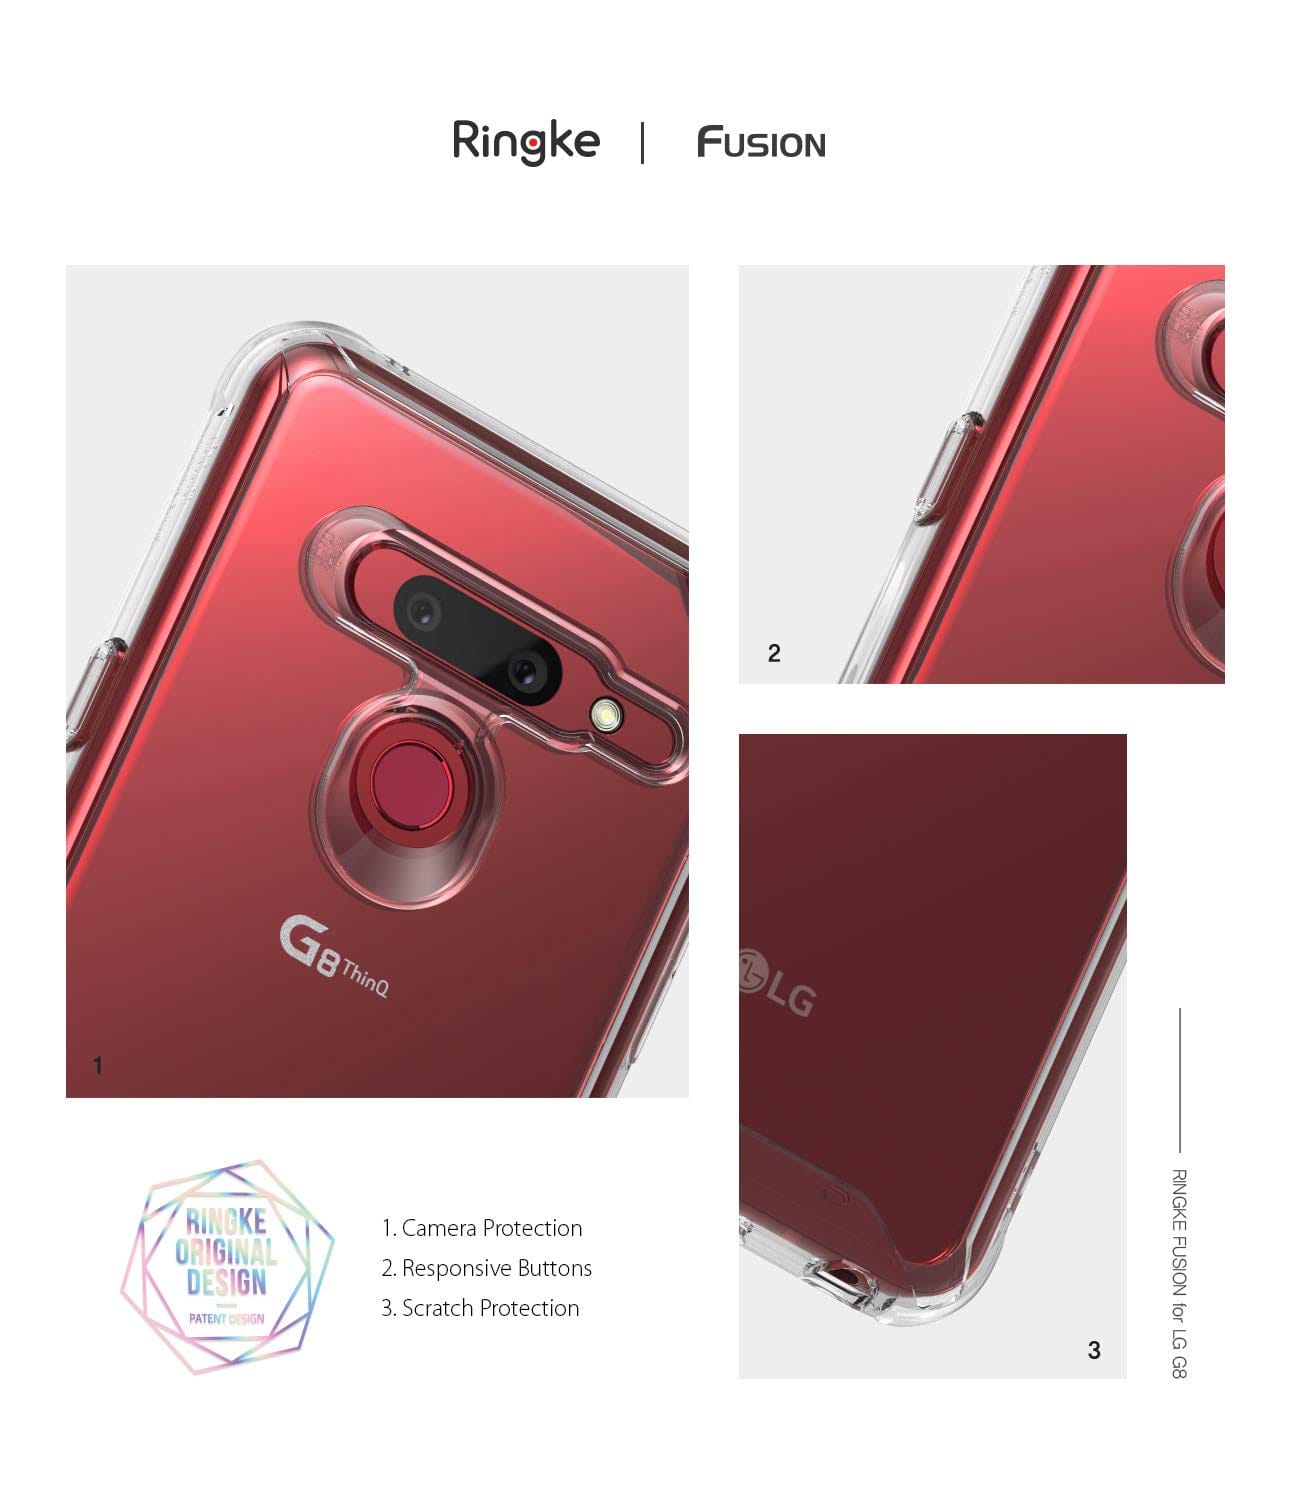 Ringke Fusion Case for LG G8 Thinq 